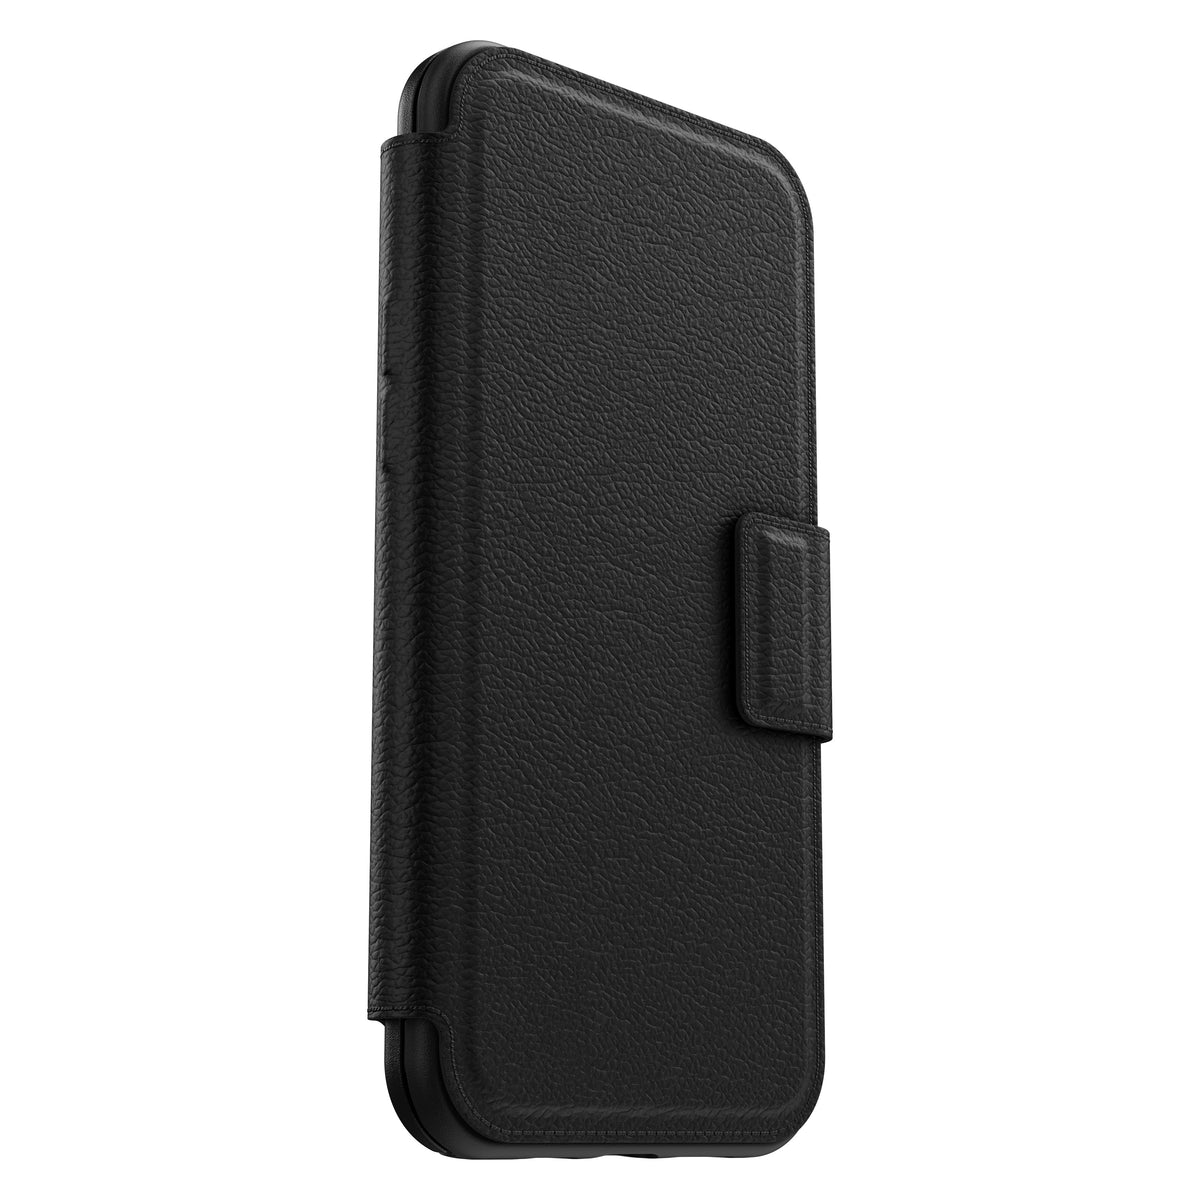 [OPEN BOX] OTTERBOX iPhone 12 Pro Max - Magsafe Folio only - Case not included - Black